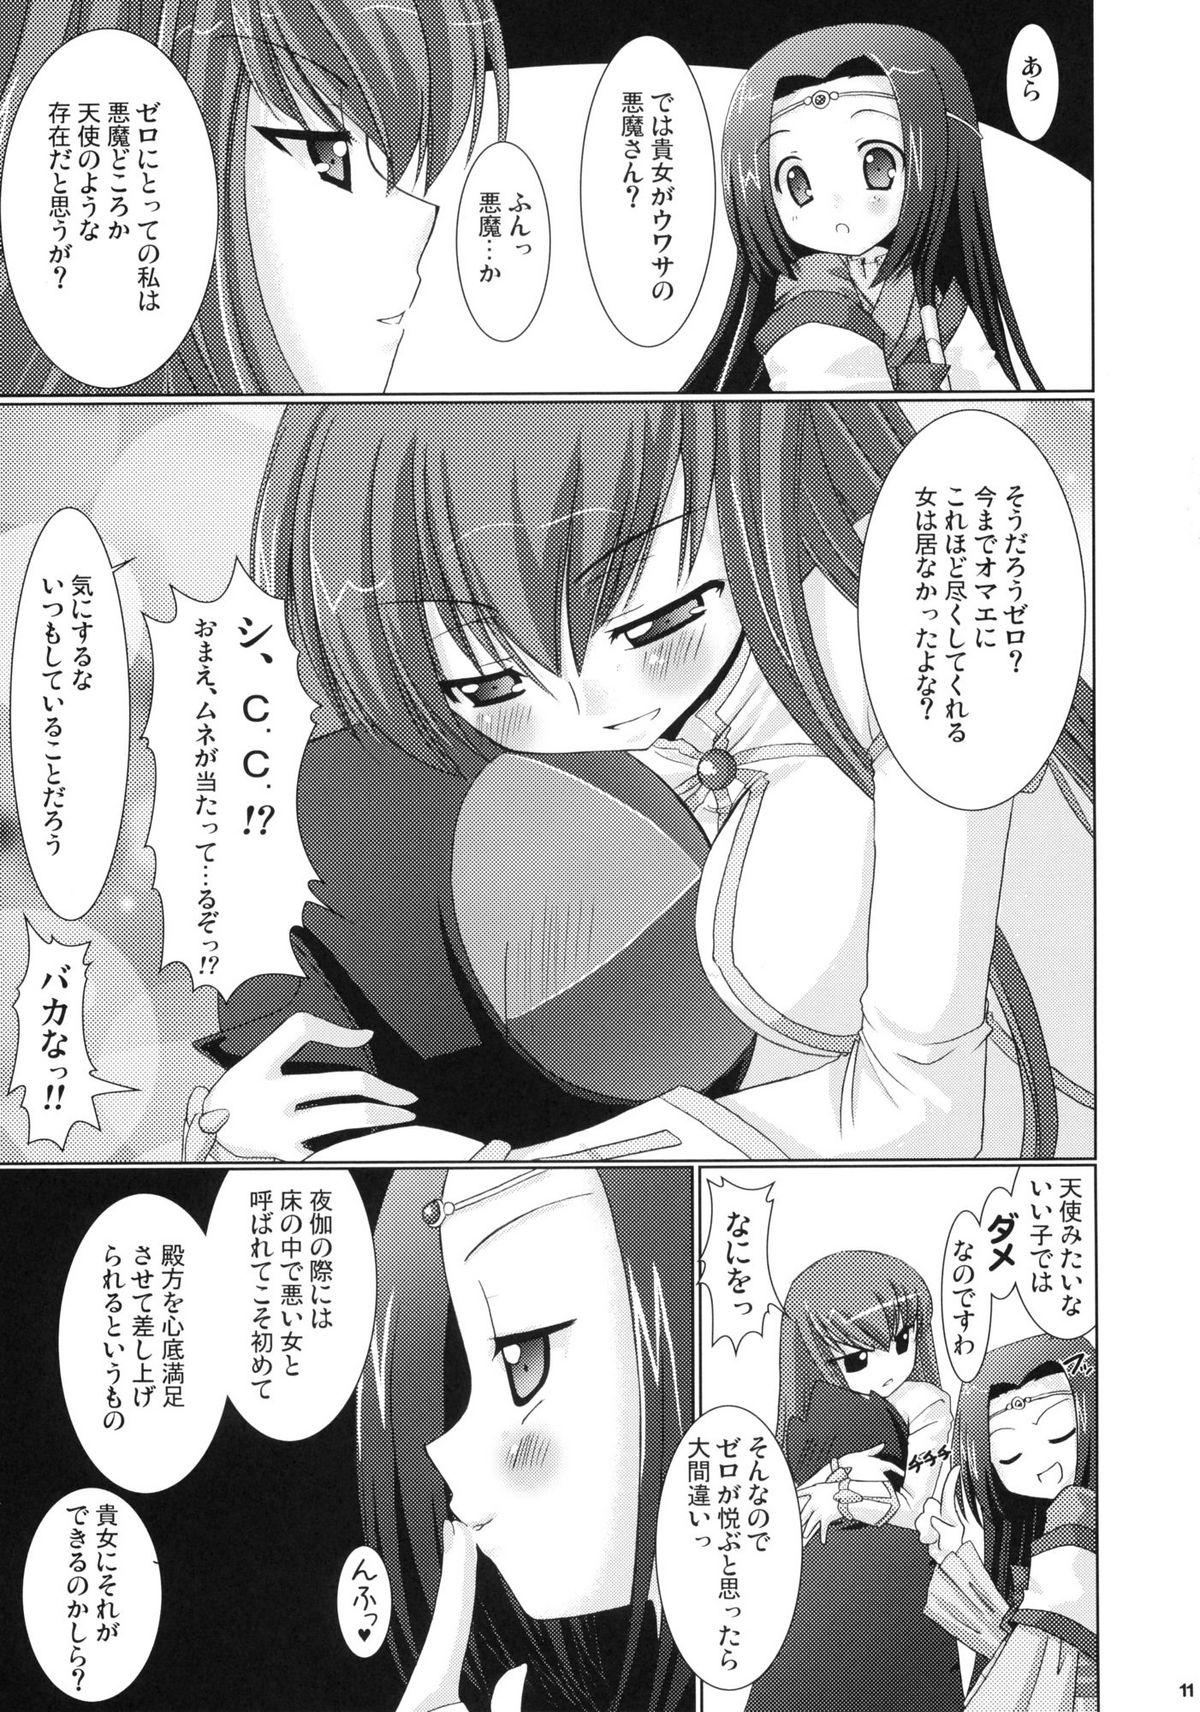 Sex Tape Kouhime Kyouhime - Code geass Cocks - Page 11